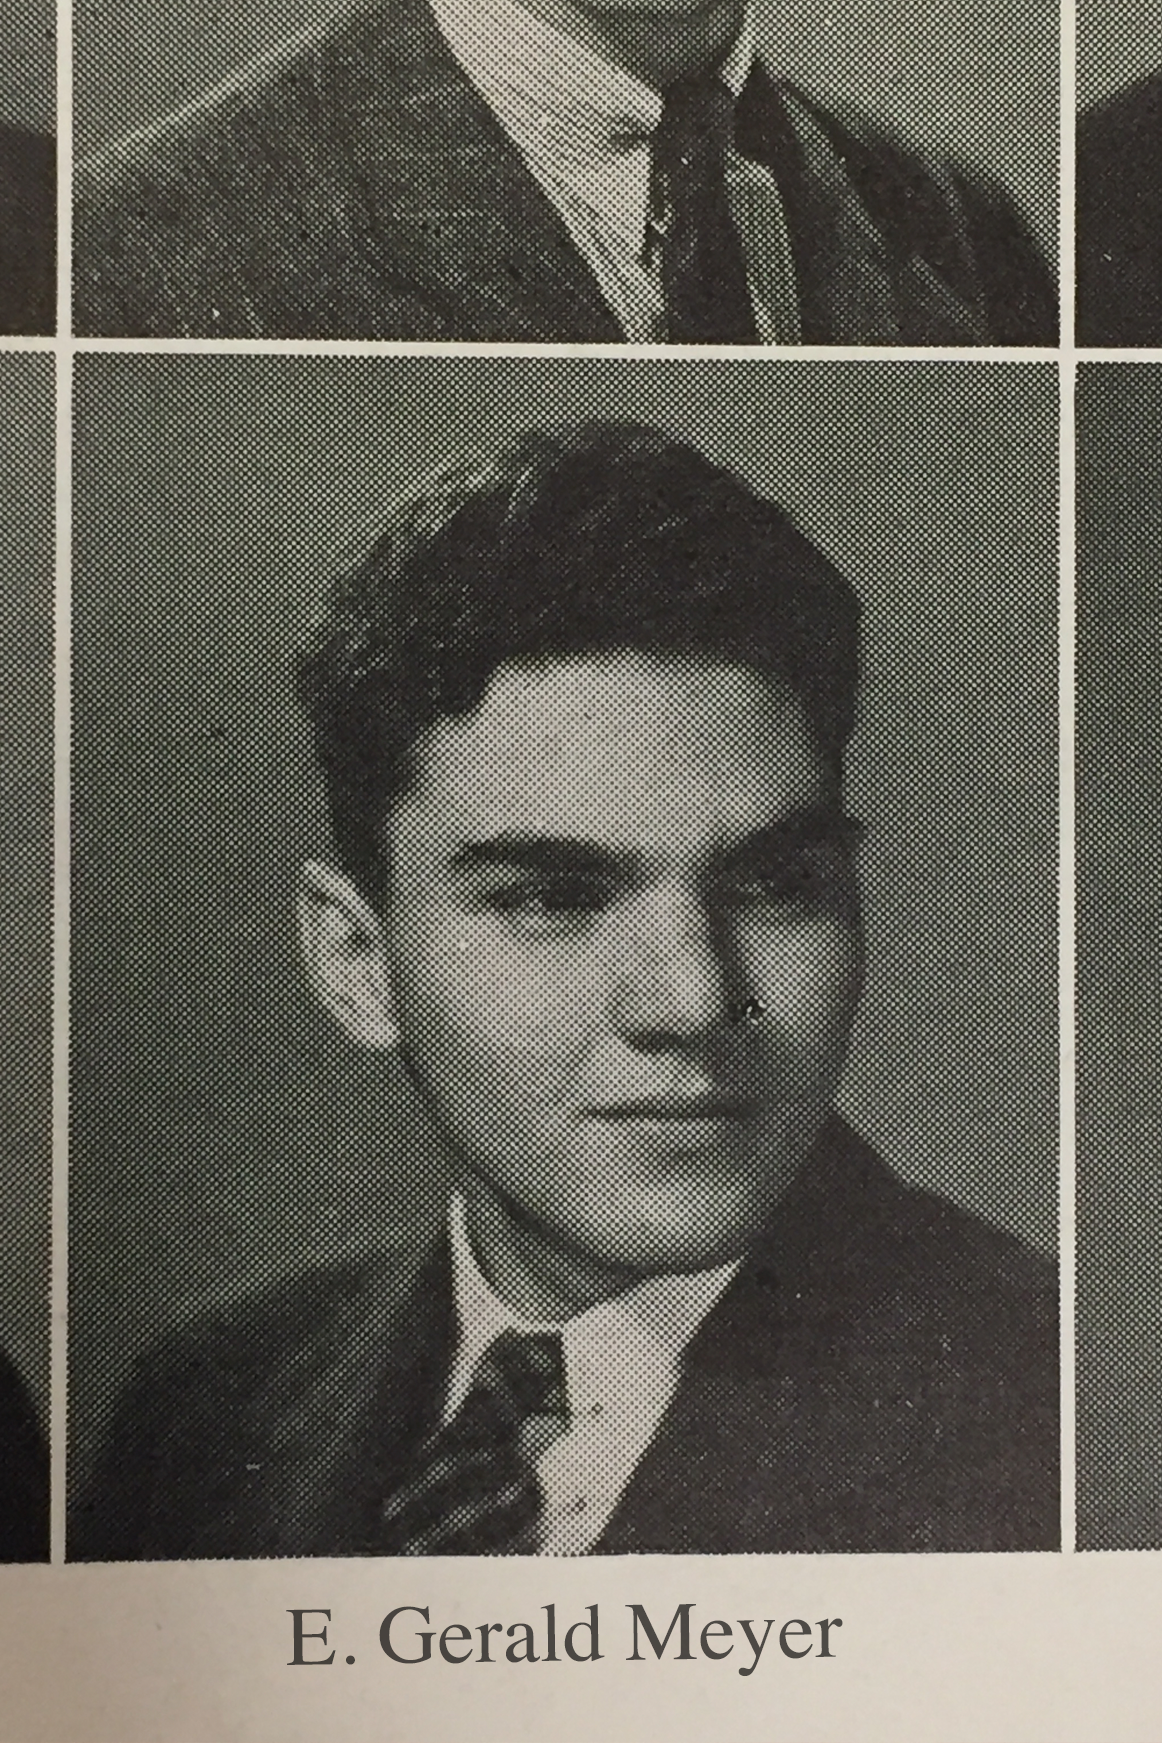 Old yearbook photo of Meyer